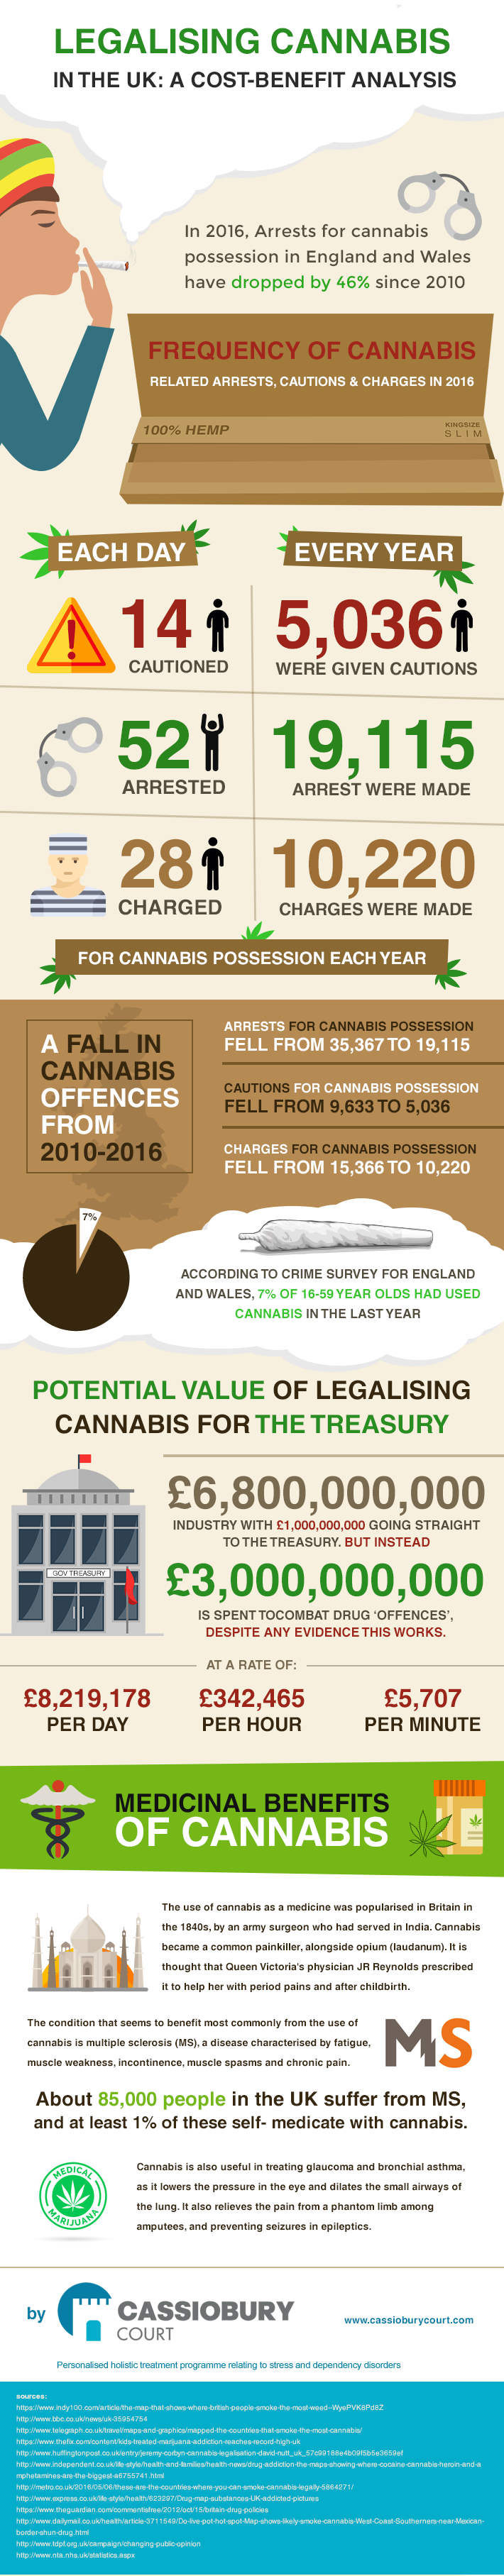 Costs of legalising cannabis